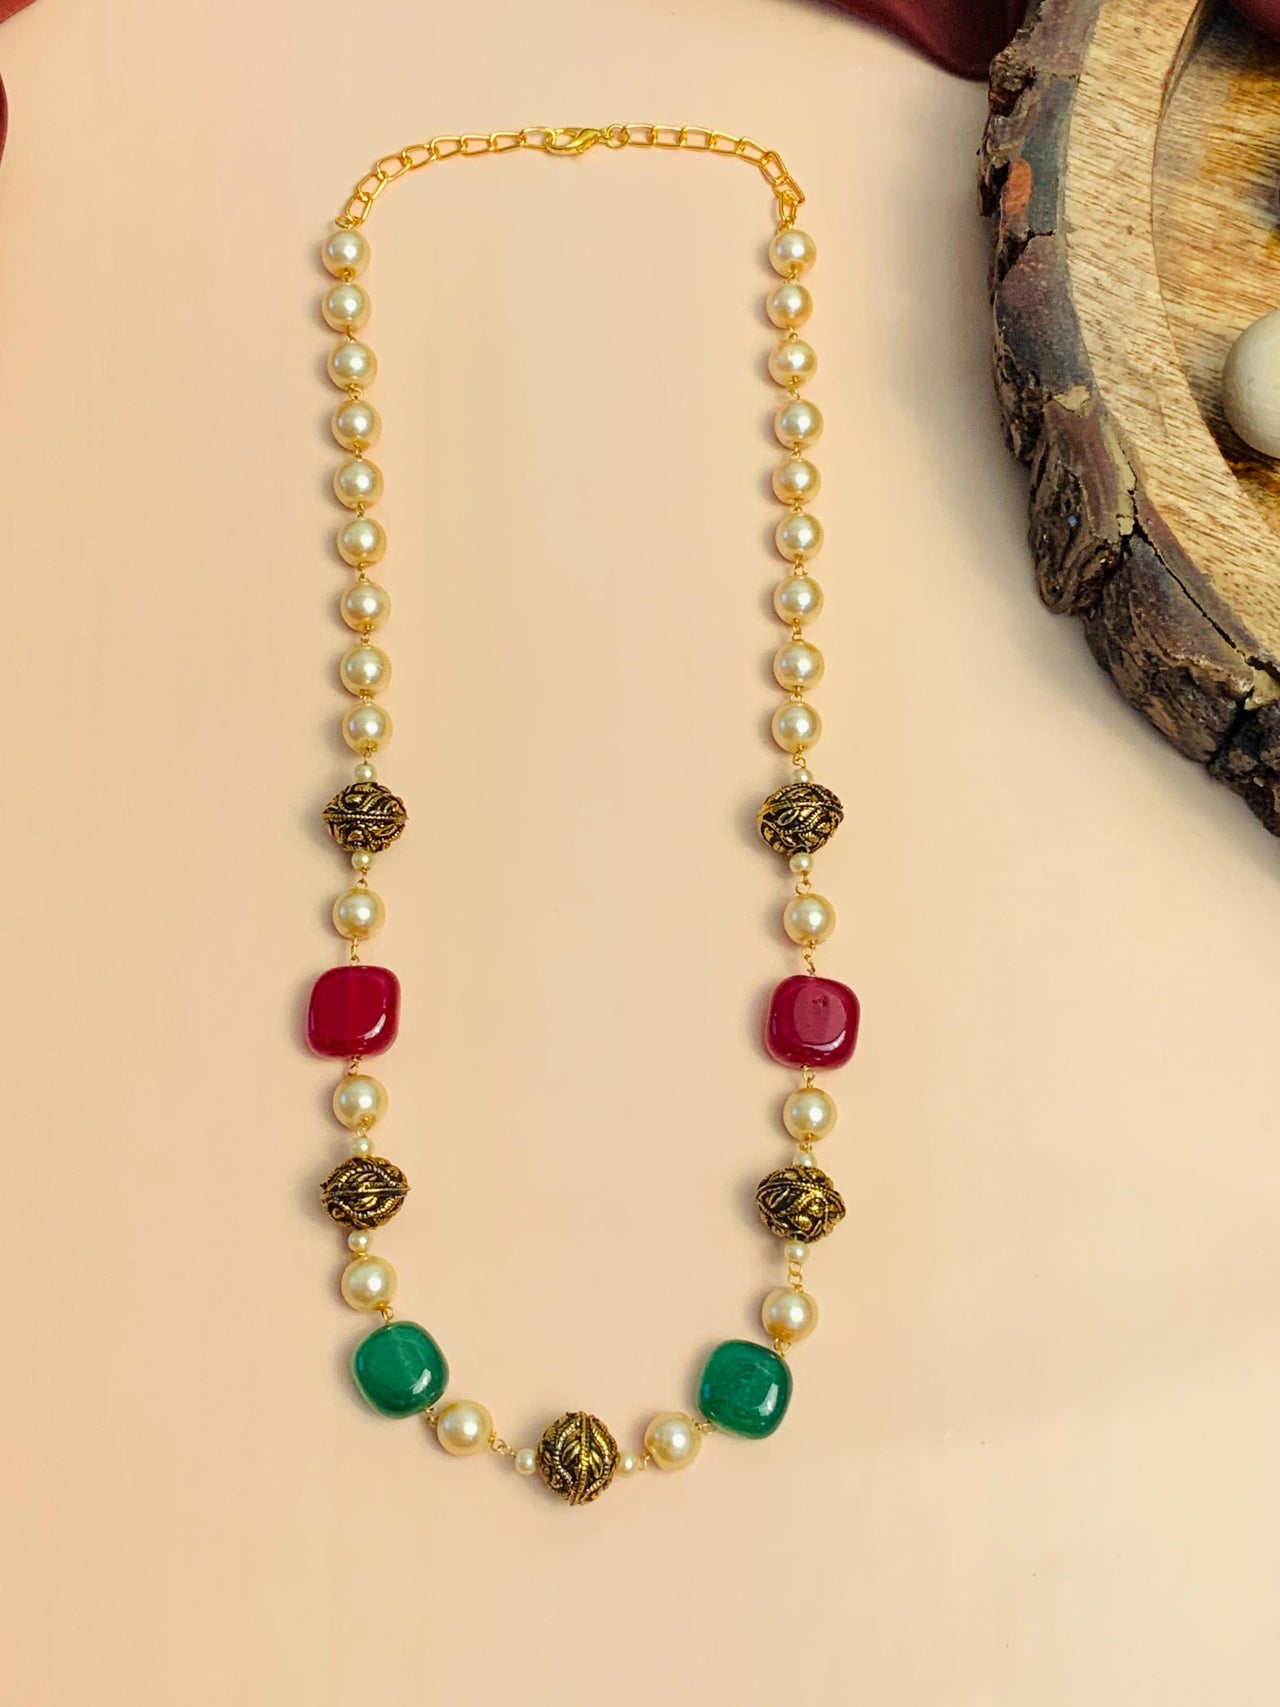 Charming High Quality Natural Stones and Pearl Mala - Abdesignsjewellery